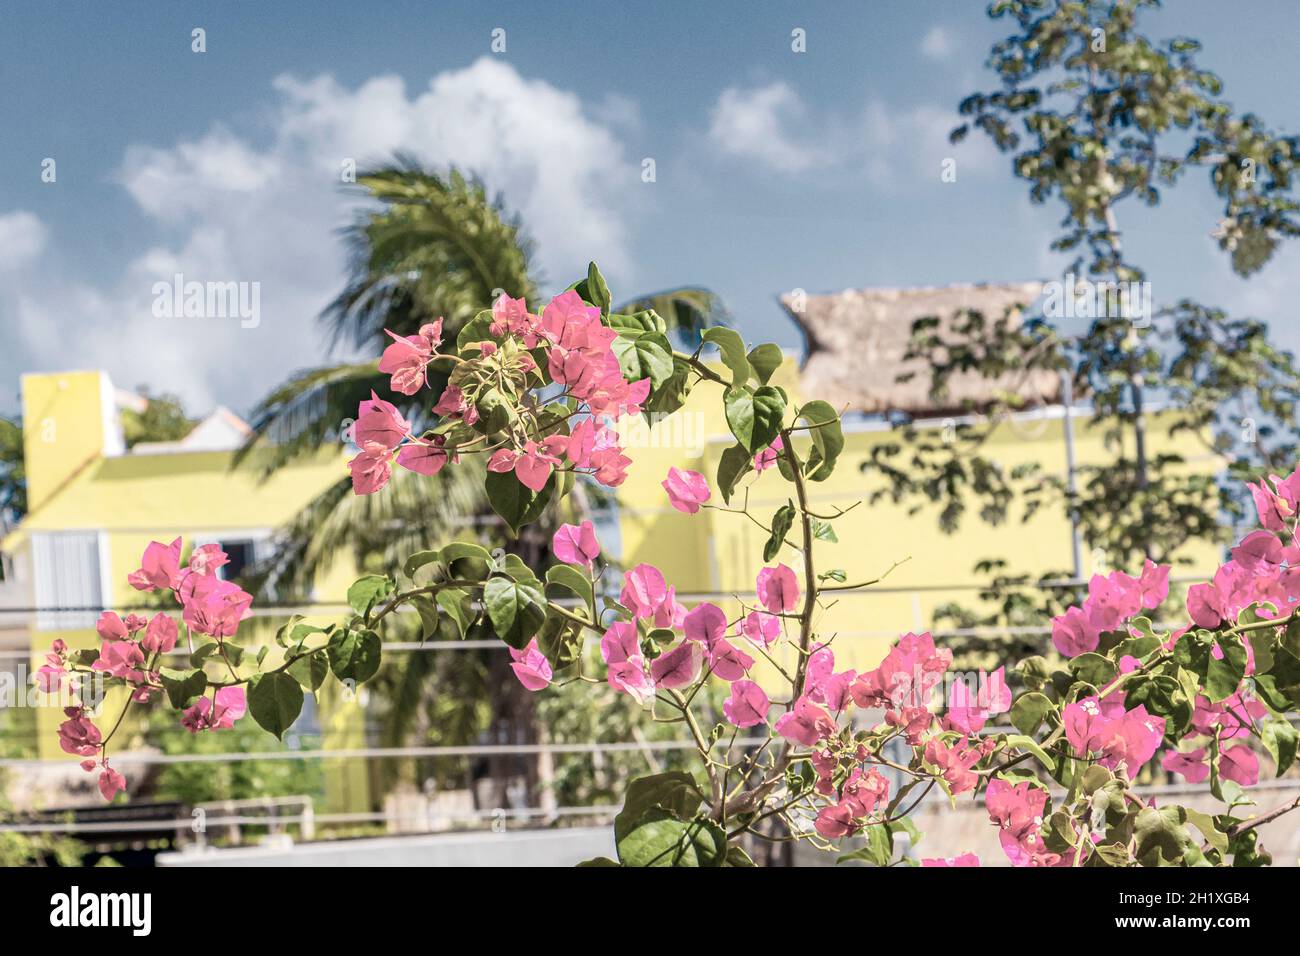 Bougainvillea pink flowers and blossoms with palm trees in background in Playa del Carmen Mexico. Stock Photo